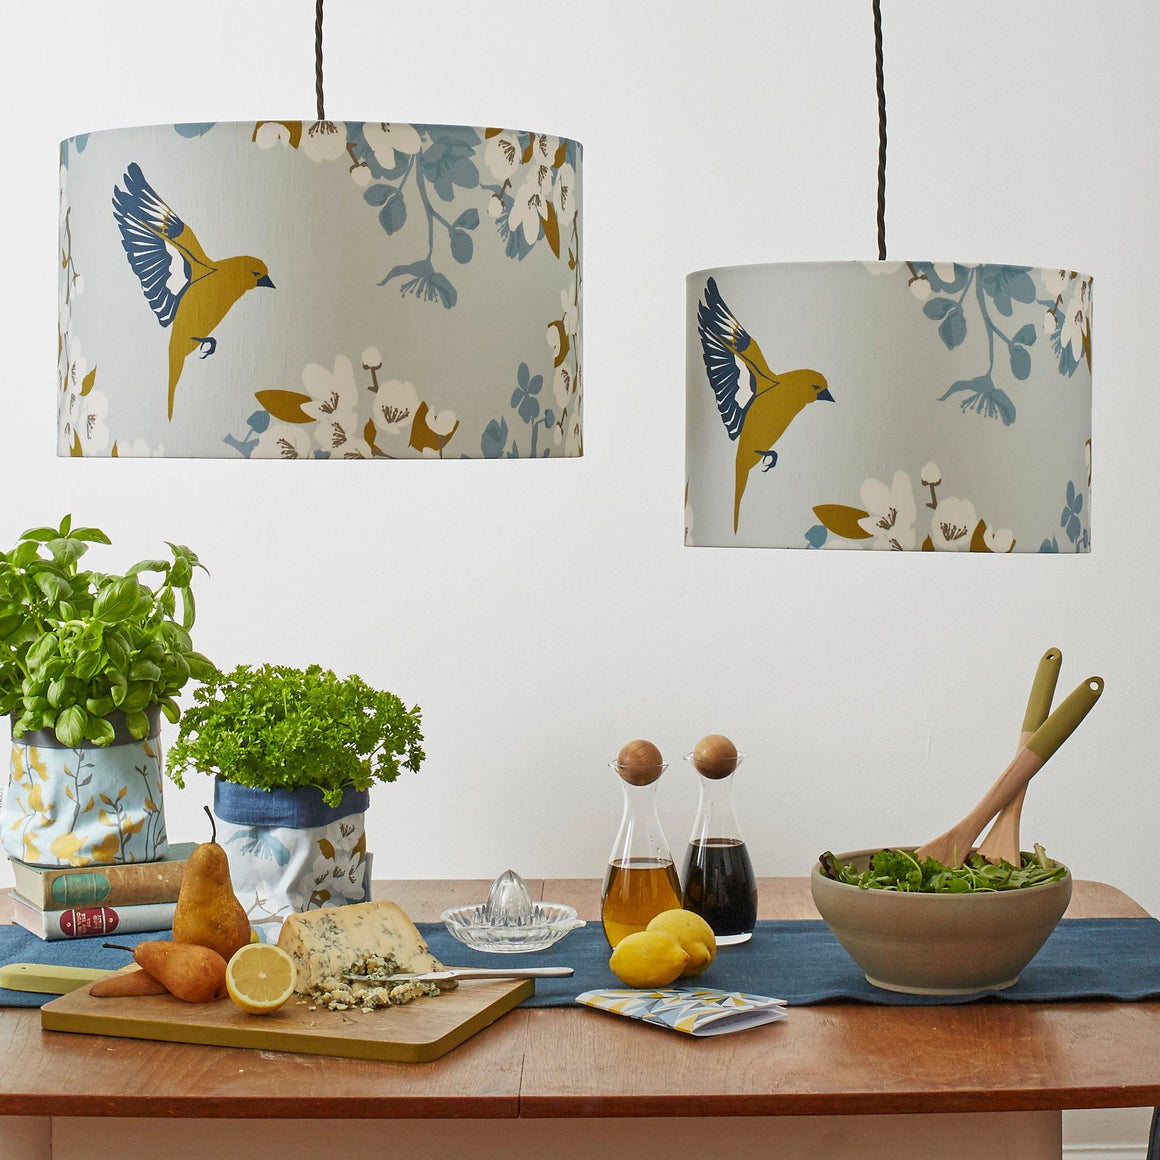 GREENFINCH LAMPSHADE